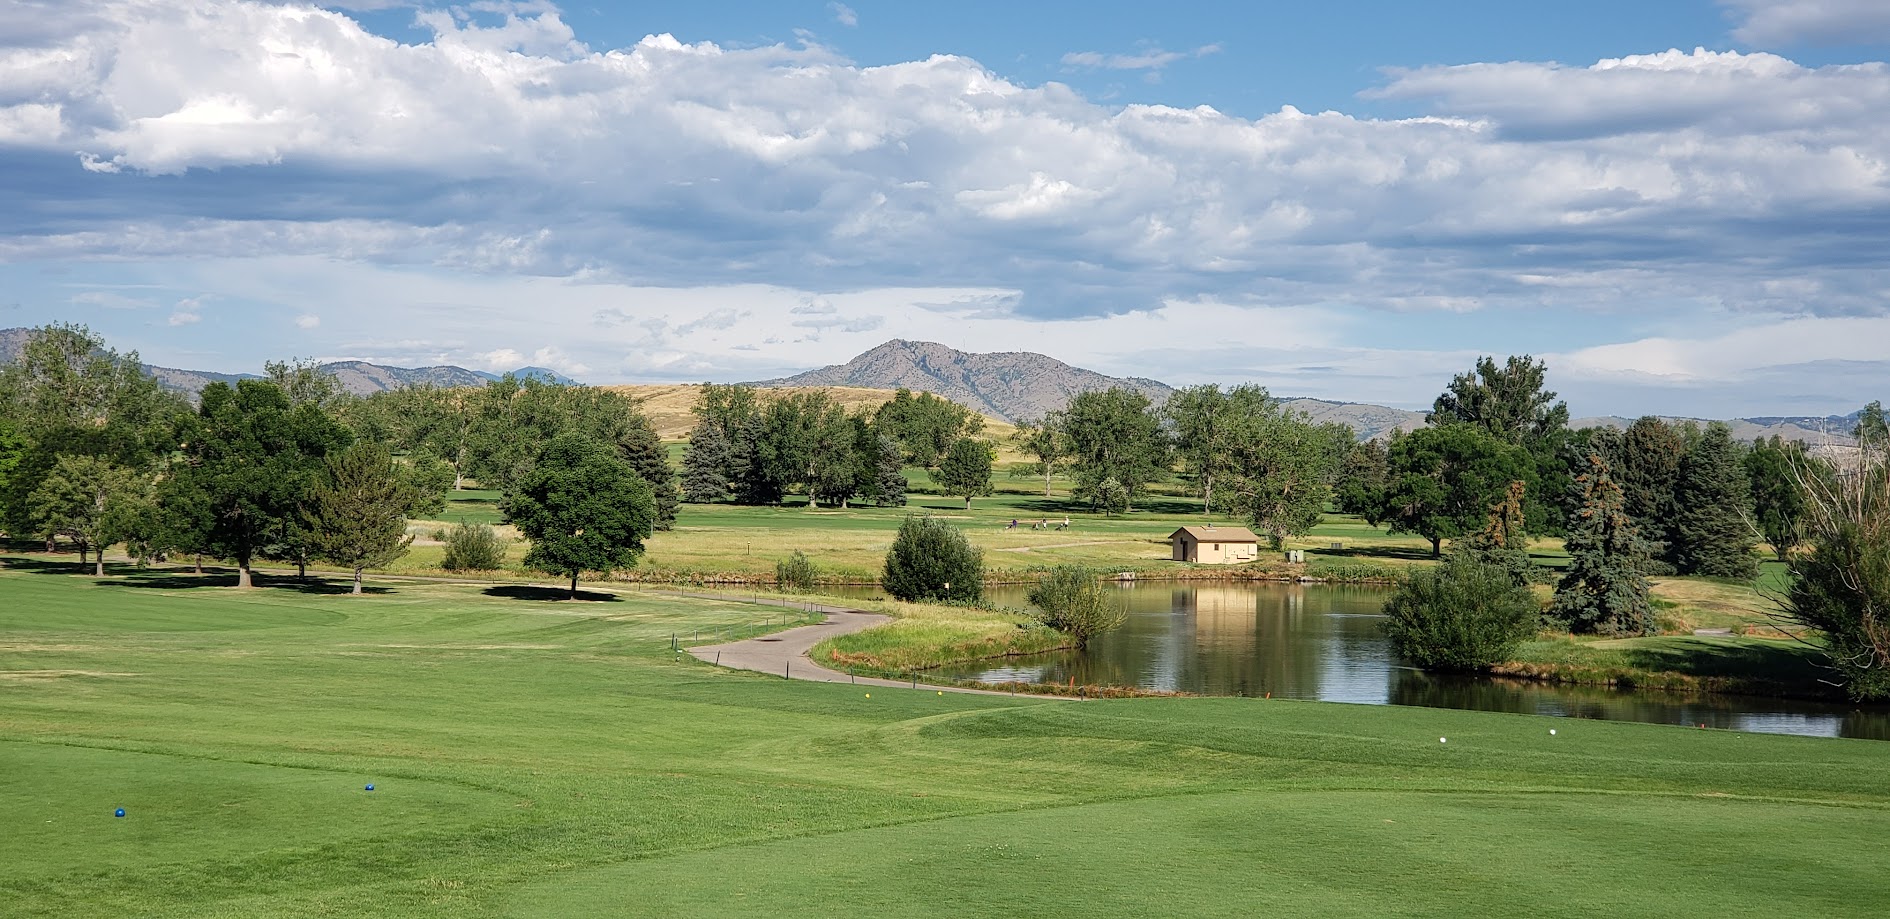 Foothills Golf Course